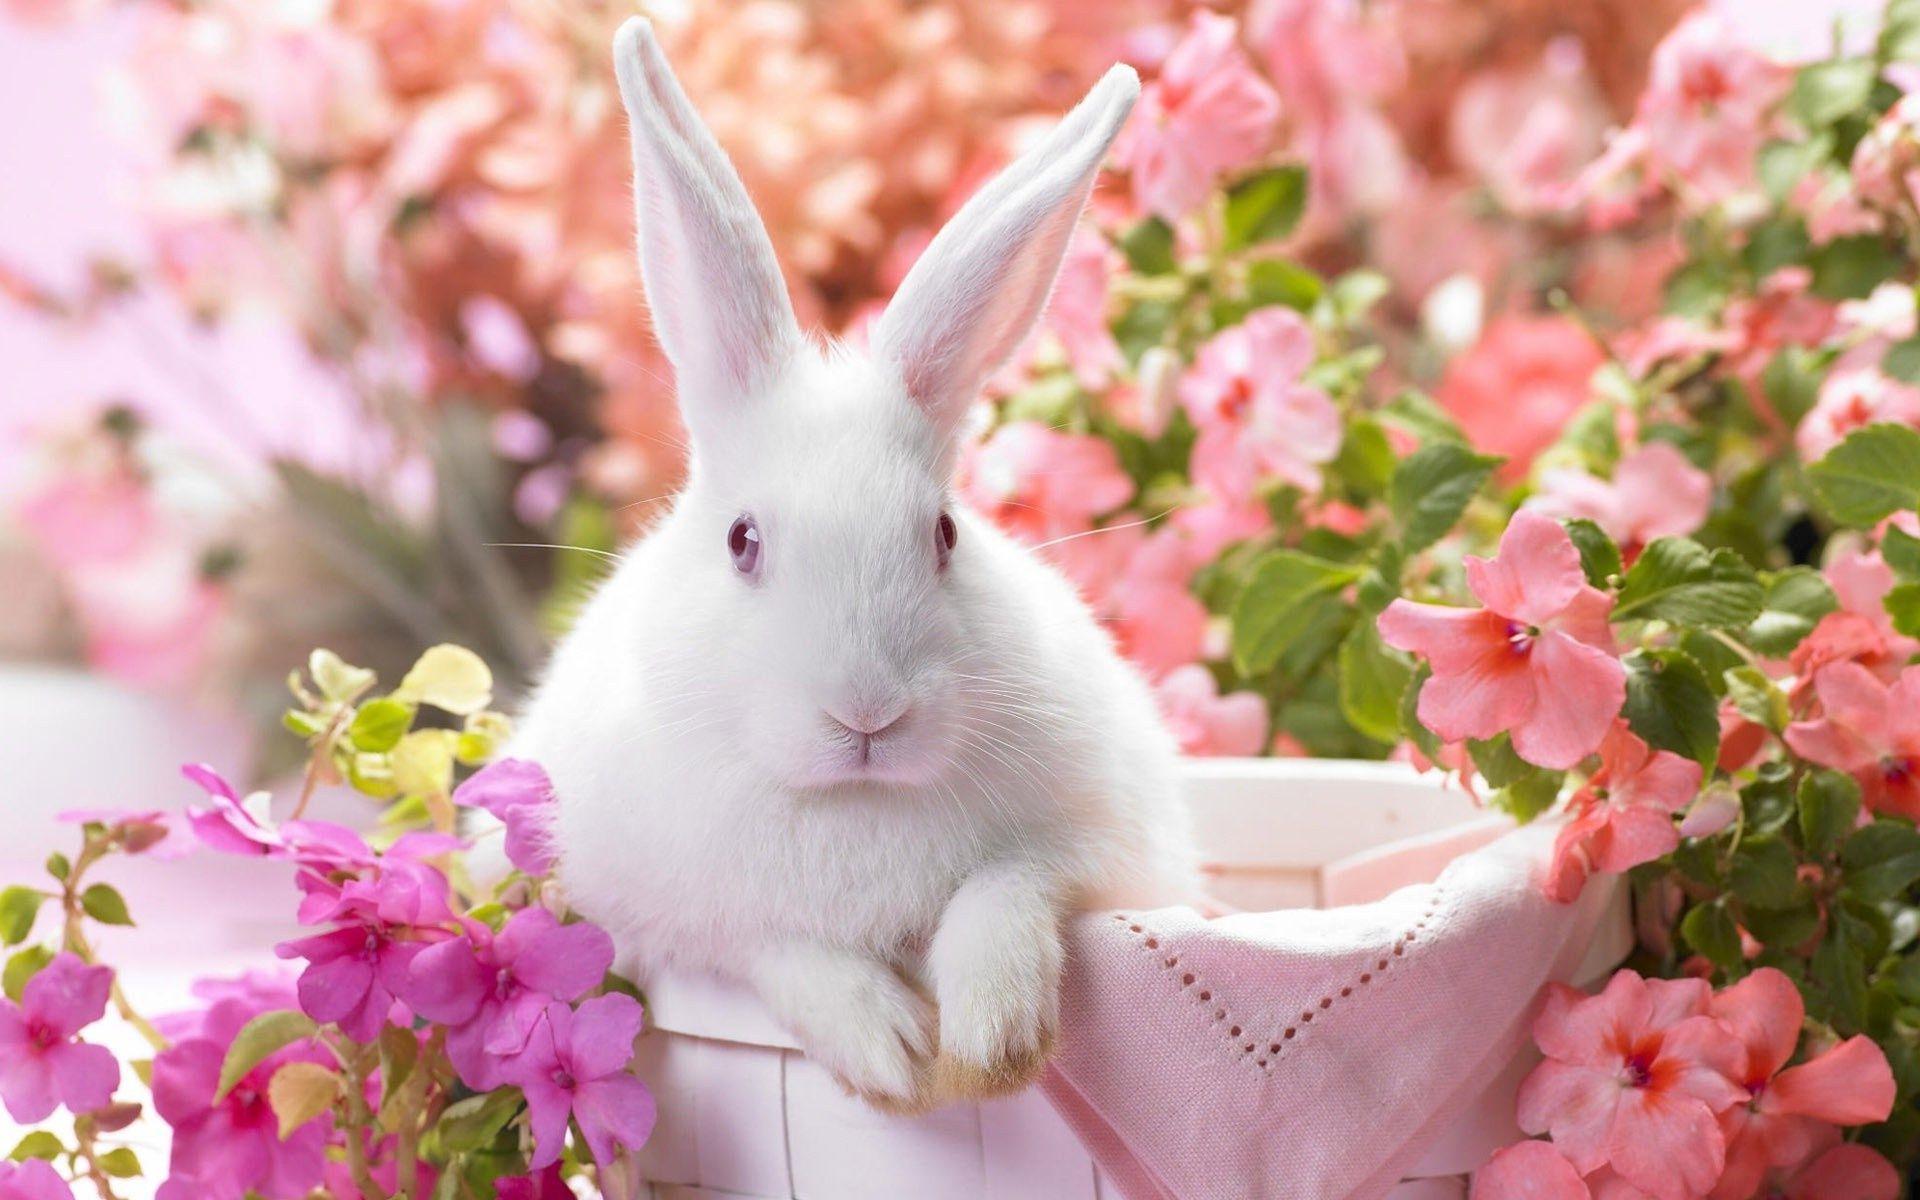 White Rabbit Bunny with Flowers Wallpaper and Photo Download